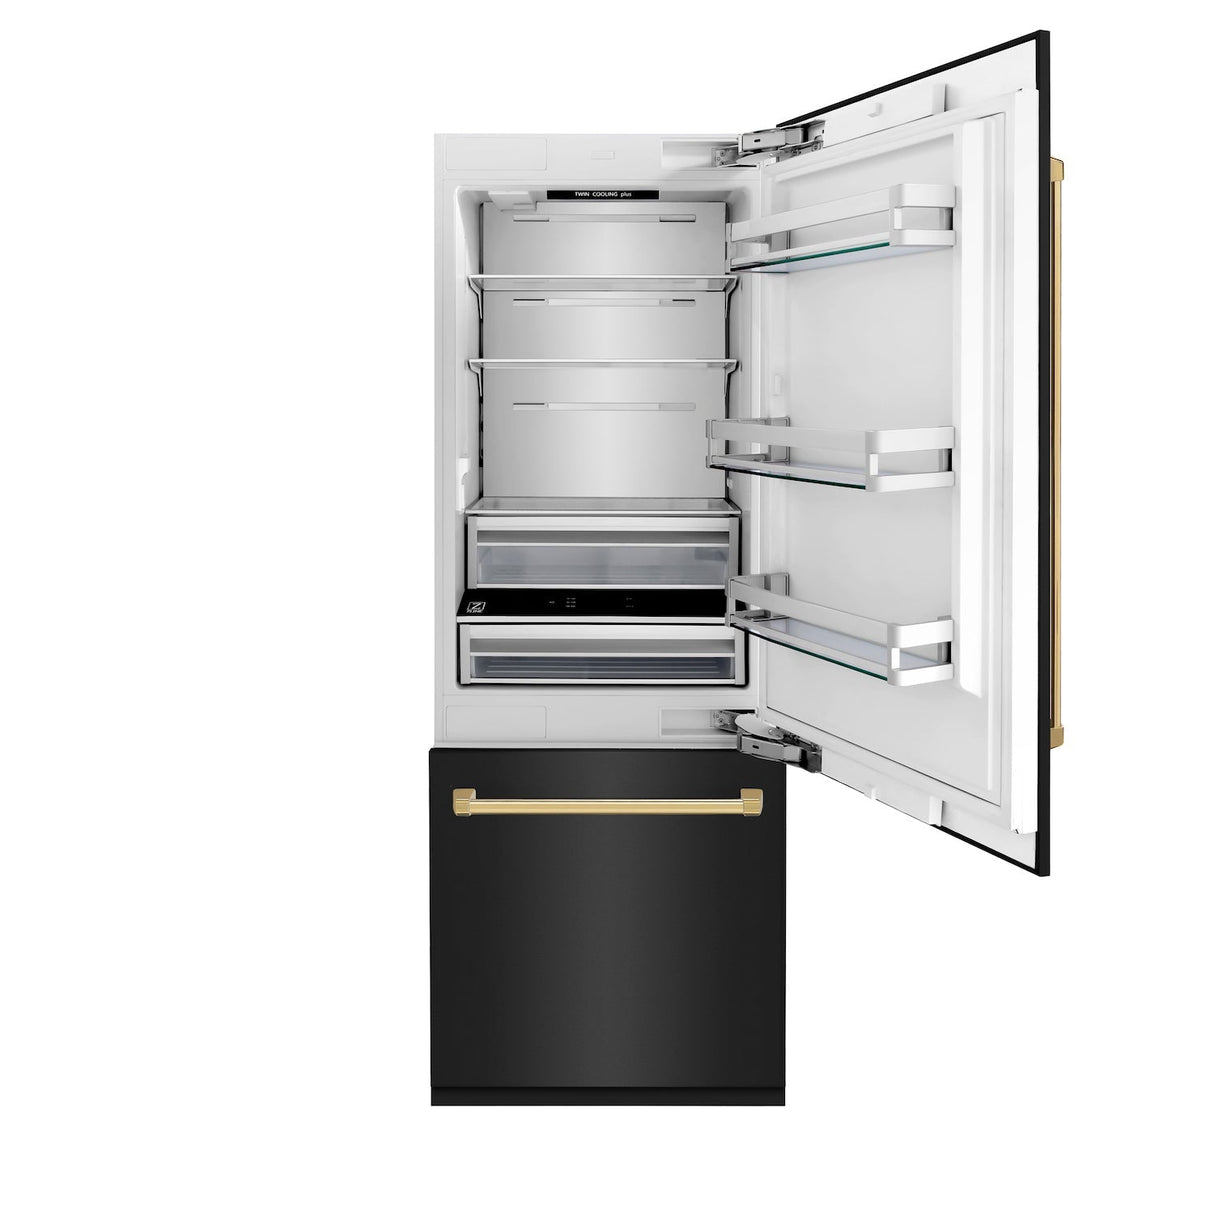 ZLINE Autograph Edition 30 in. 16.1 cu. ft. Built-in 2-Door Bottom Freezer Refrigerator with Internal Water and Ice Dispenser in Black Stainless Steel with Polished Gold Accents (RBIVZ-BS-30-G)